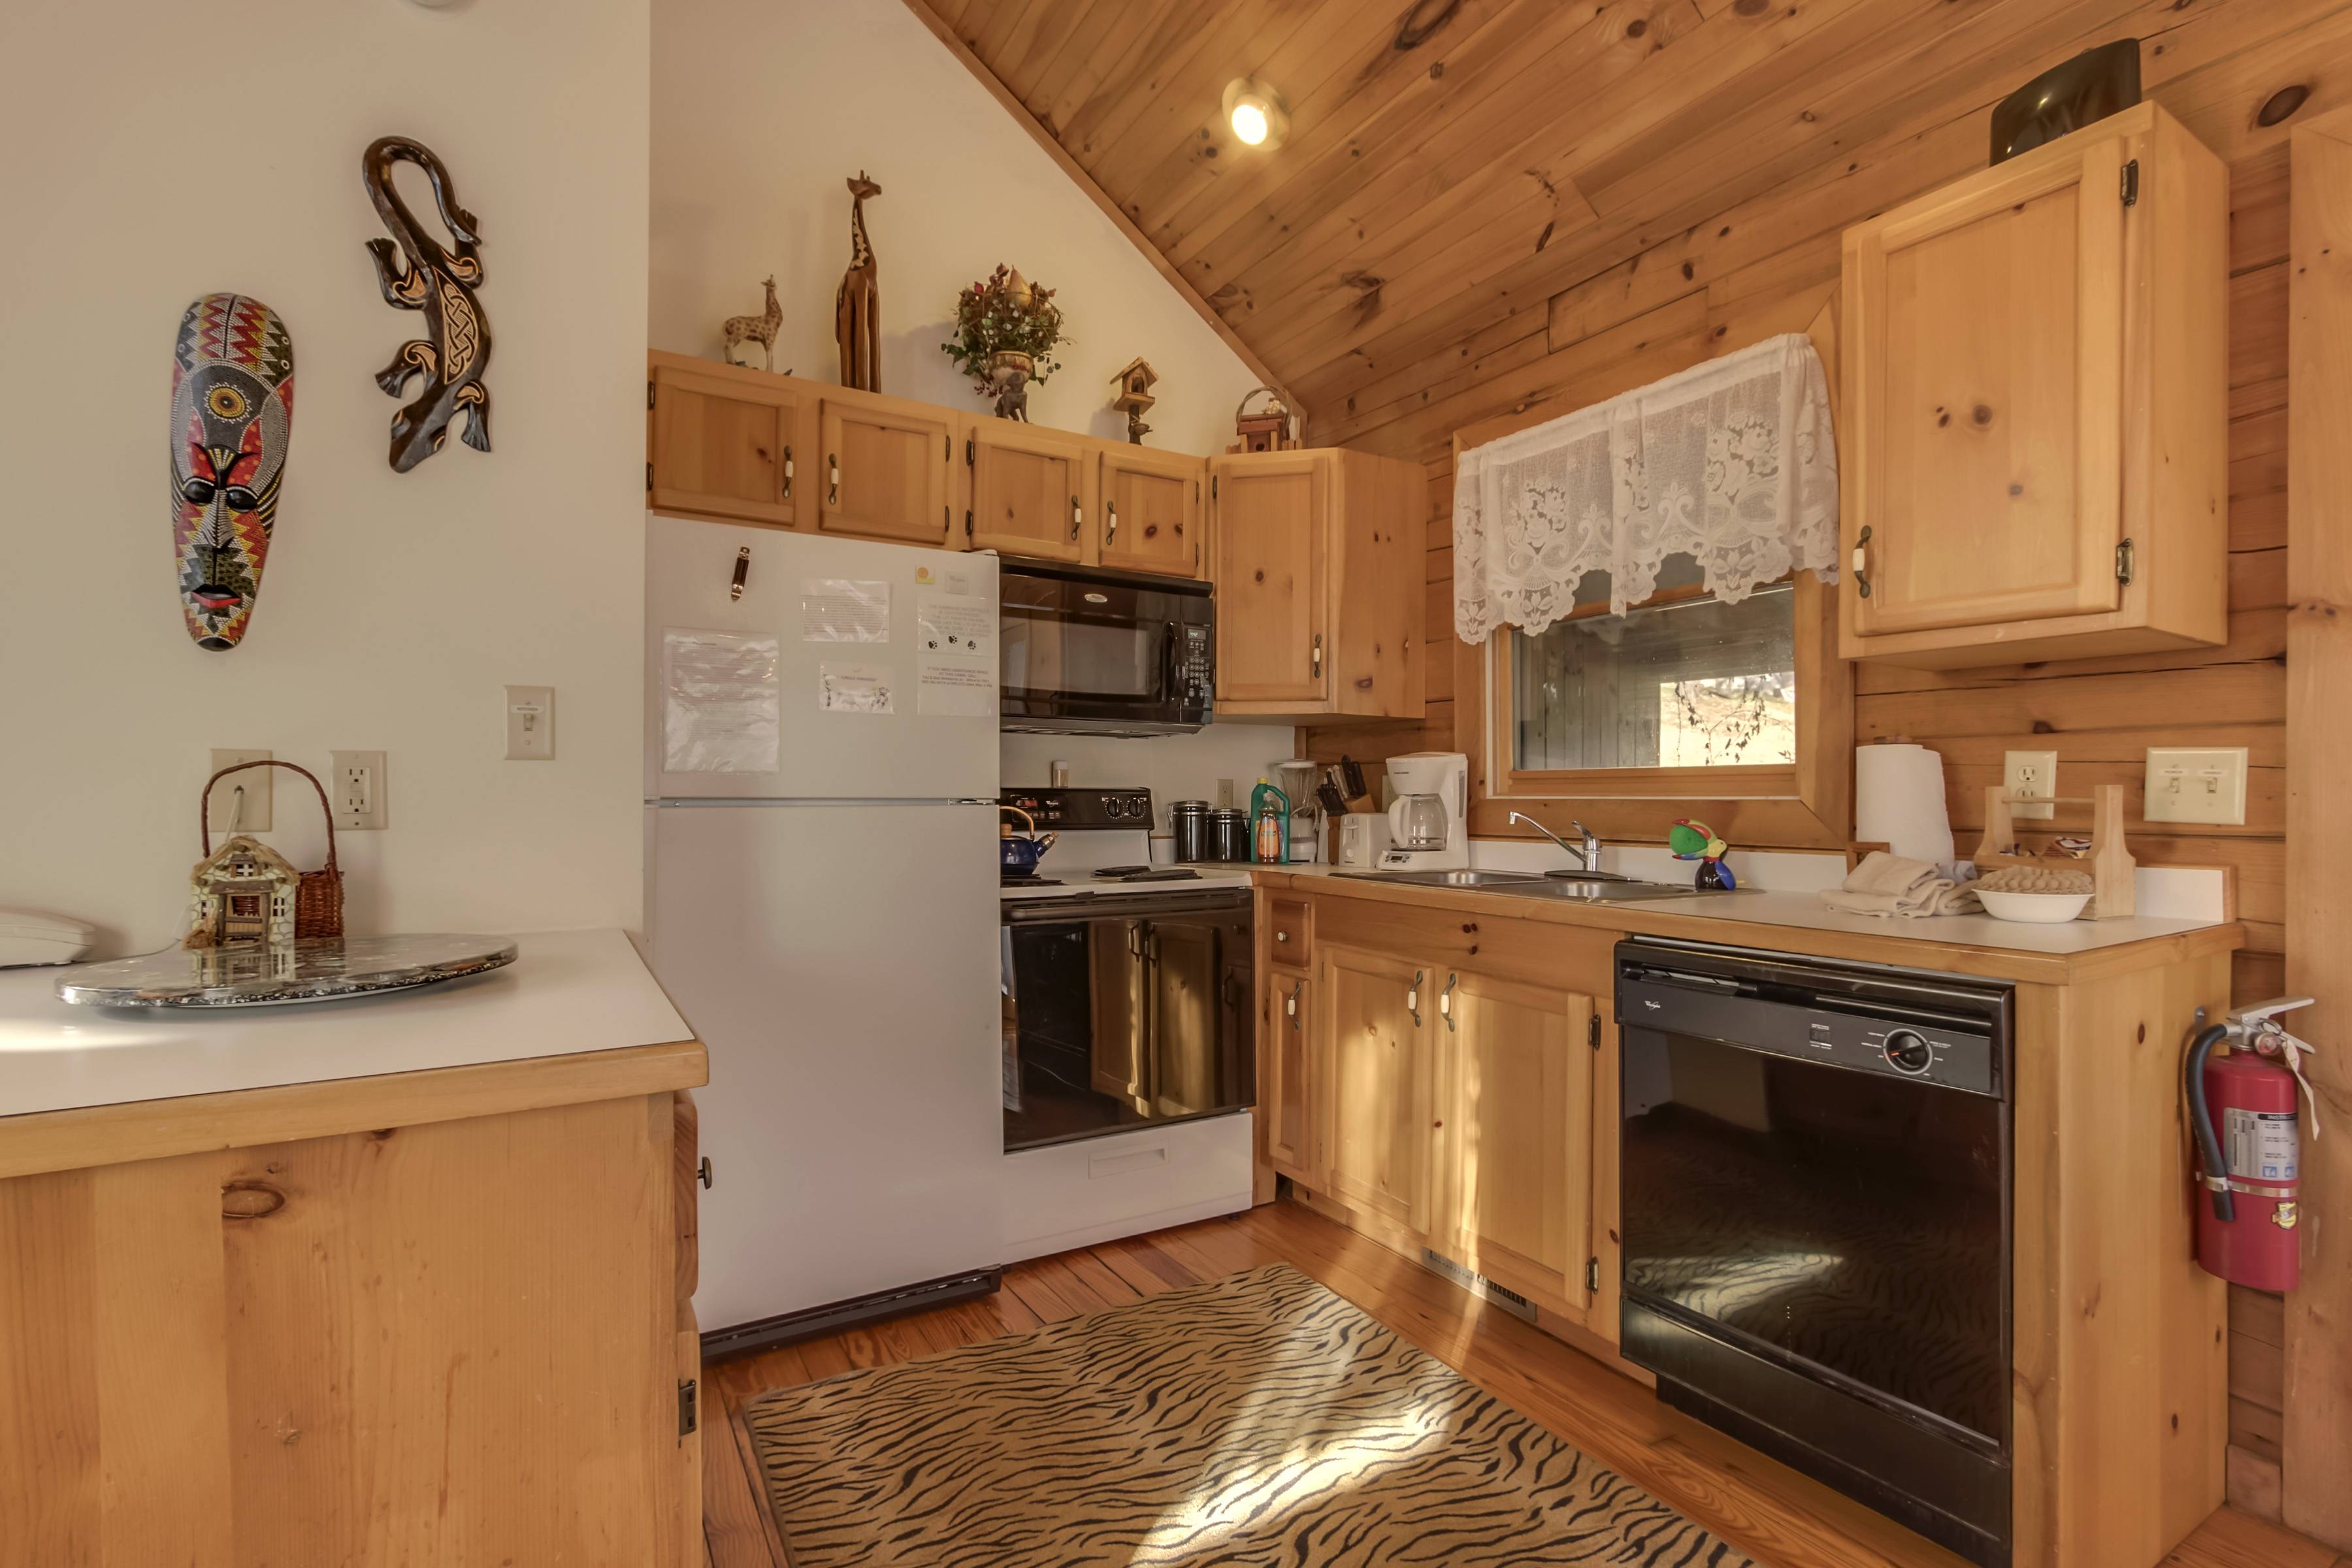 Check the amenities list for this kitchen